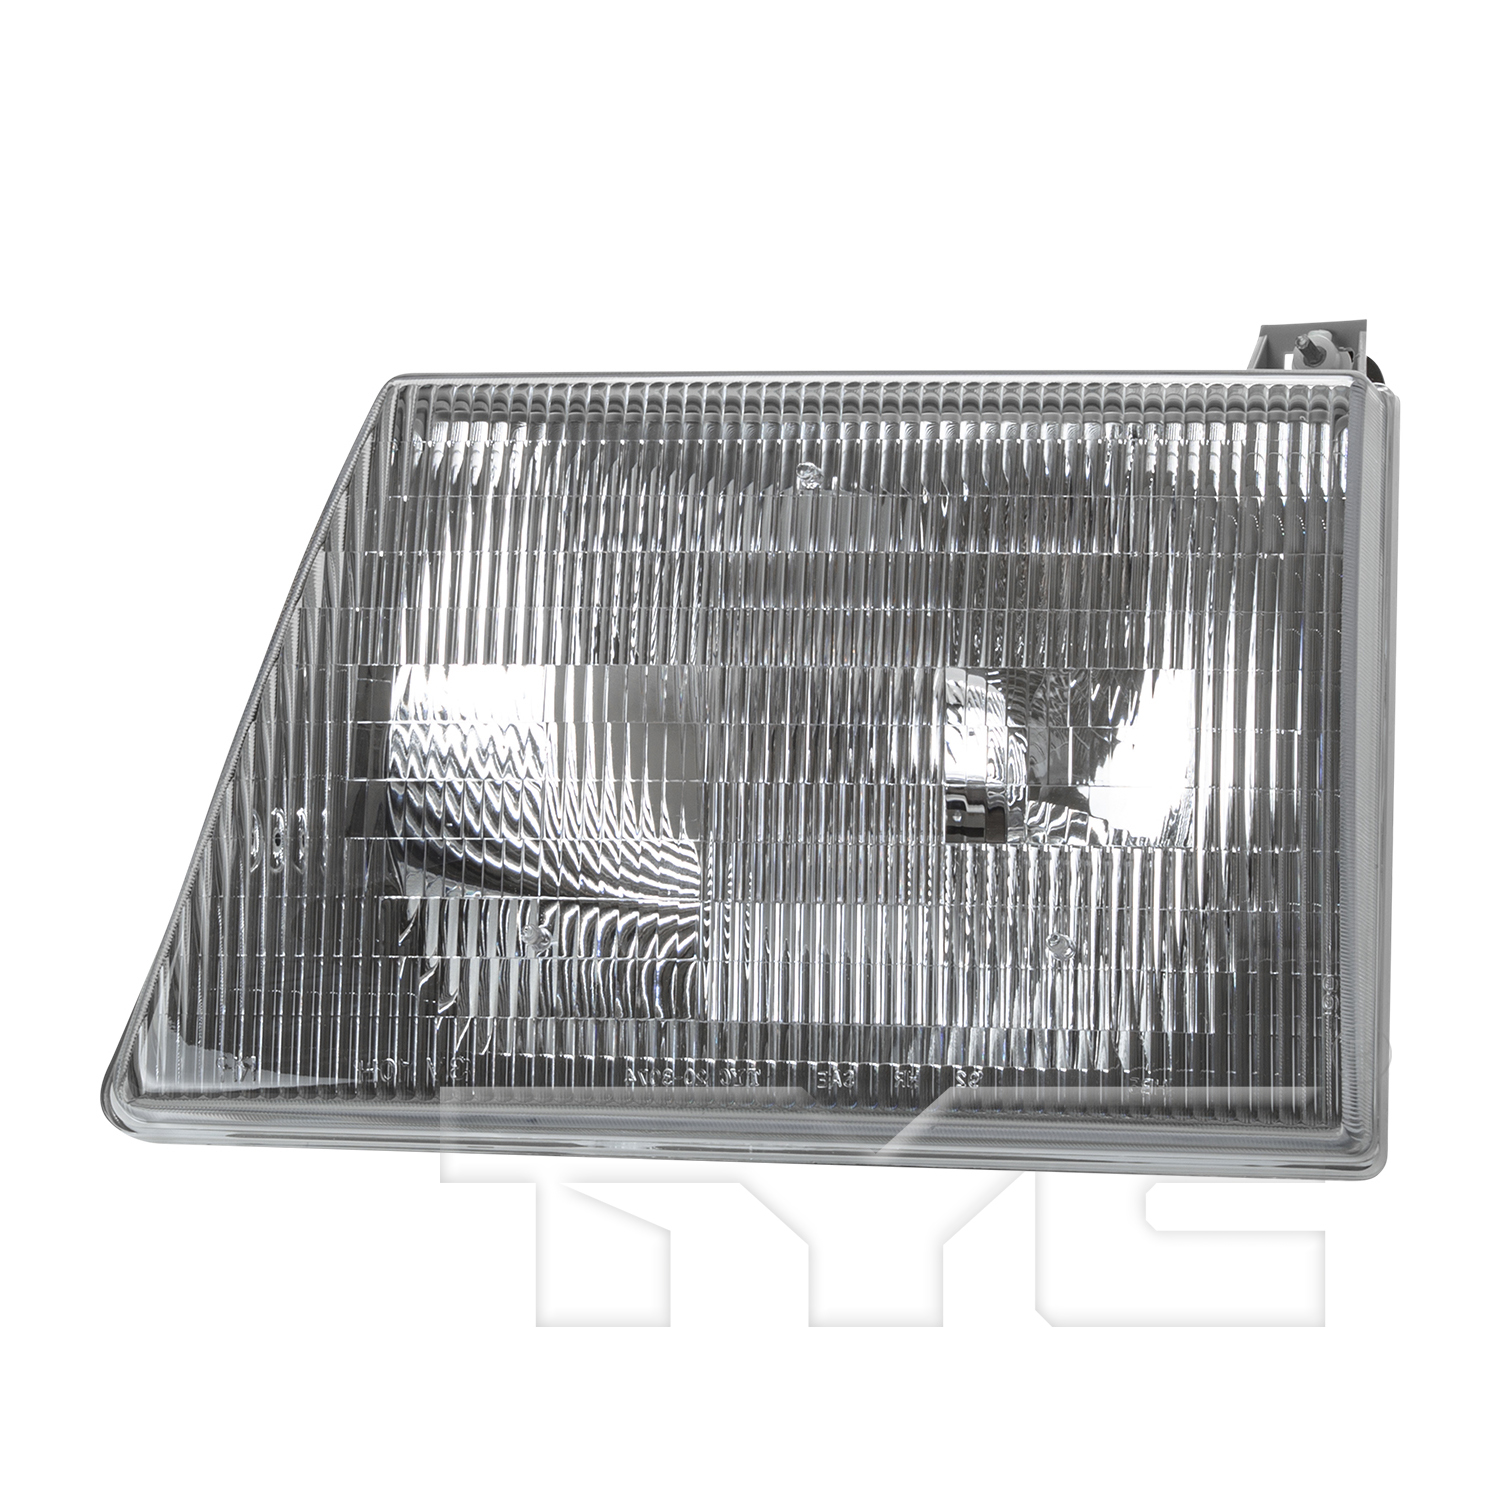 Aftermarket HEADLIGHTS for FORD - E-150, E-150,03-07,LT Headlamp assy composite